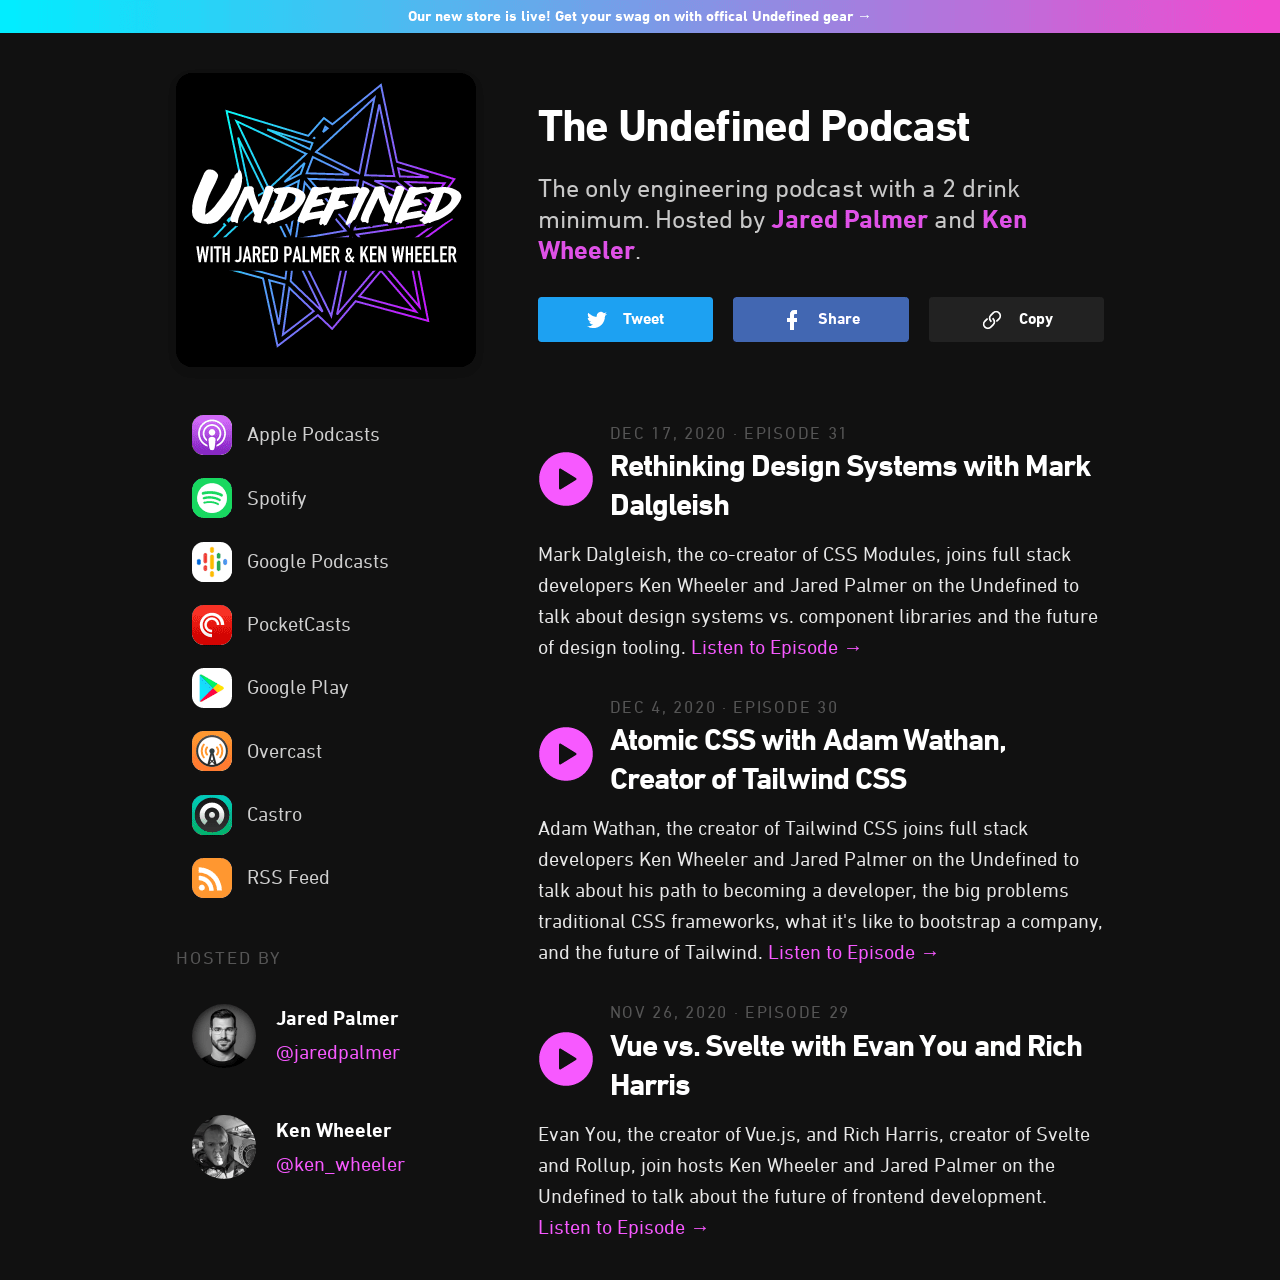 Screenshot of The Undefined Podcast website